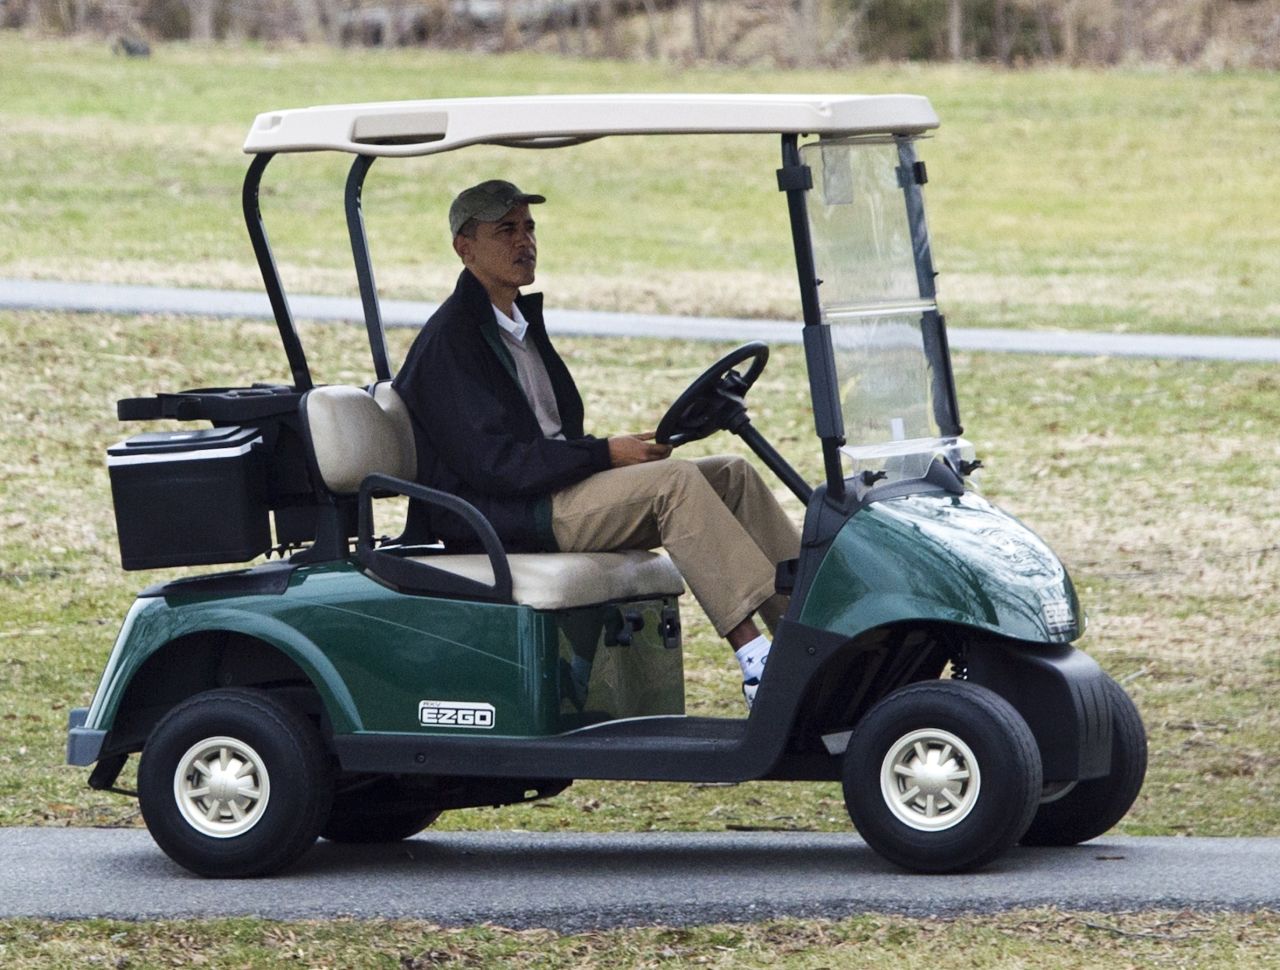 Obama recently visited Martha's Vineyard for a round of golf just hours after speaking to journalist on the subject of Iraq. The move drew condemnation from those who felt he should have remained at the White House.